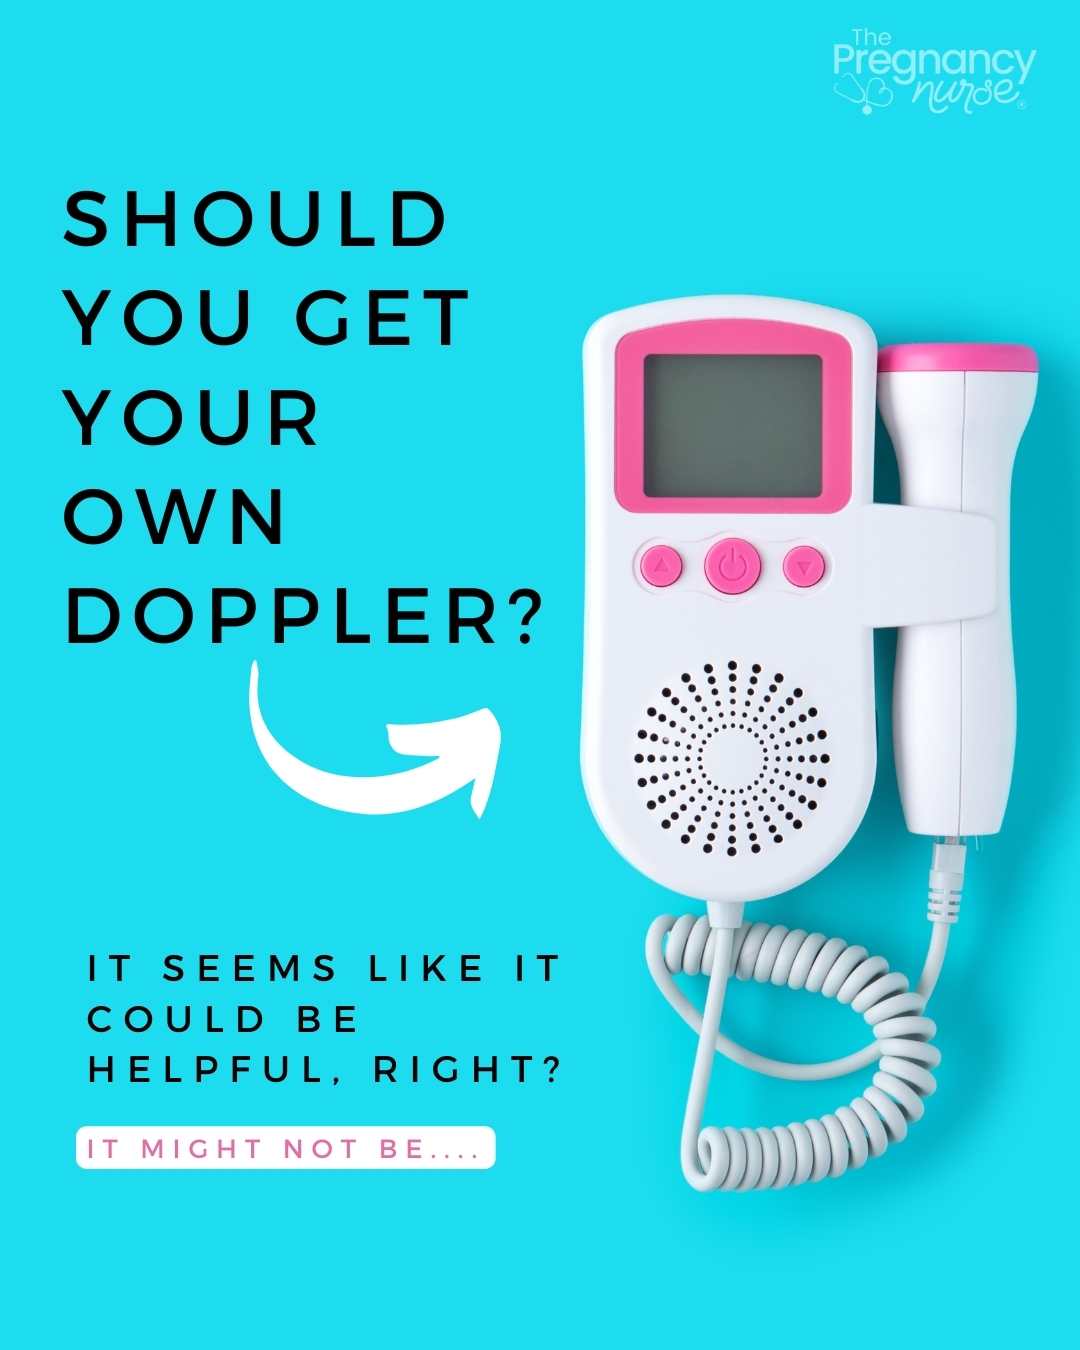 Are you considering getting your own fetal doppler? 🤔 Check out our fun and informative guide to help you decide whether it's a smart choice or not! 🎉🎉